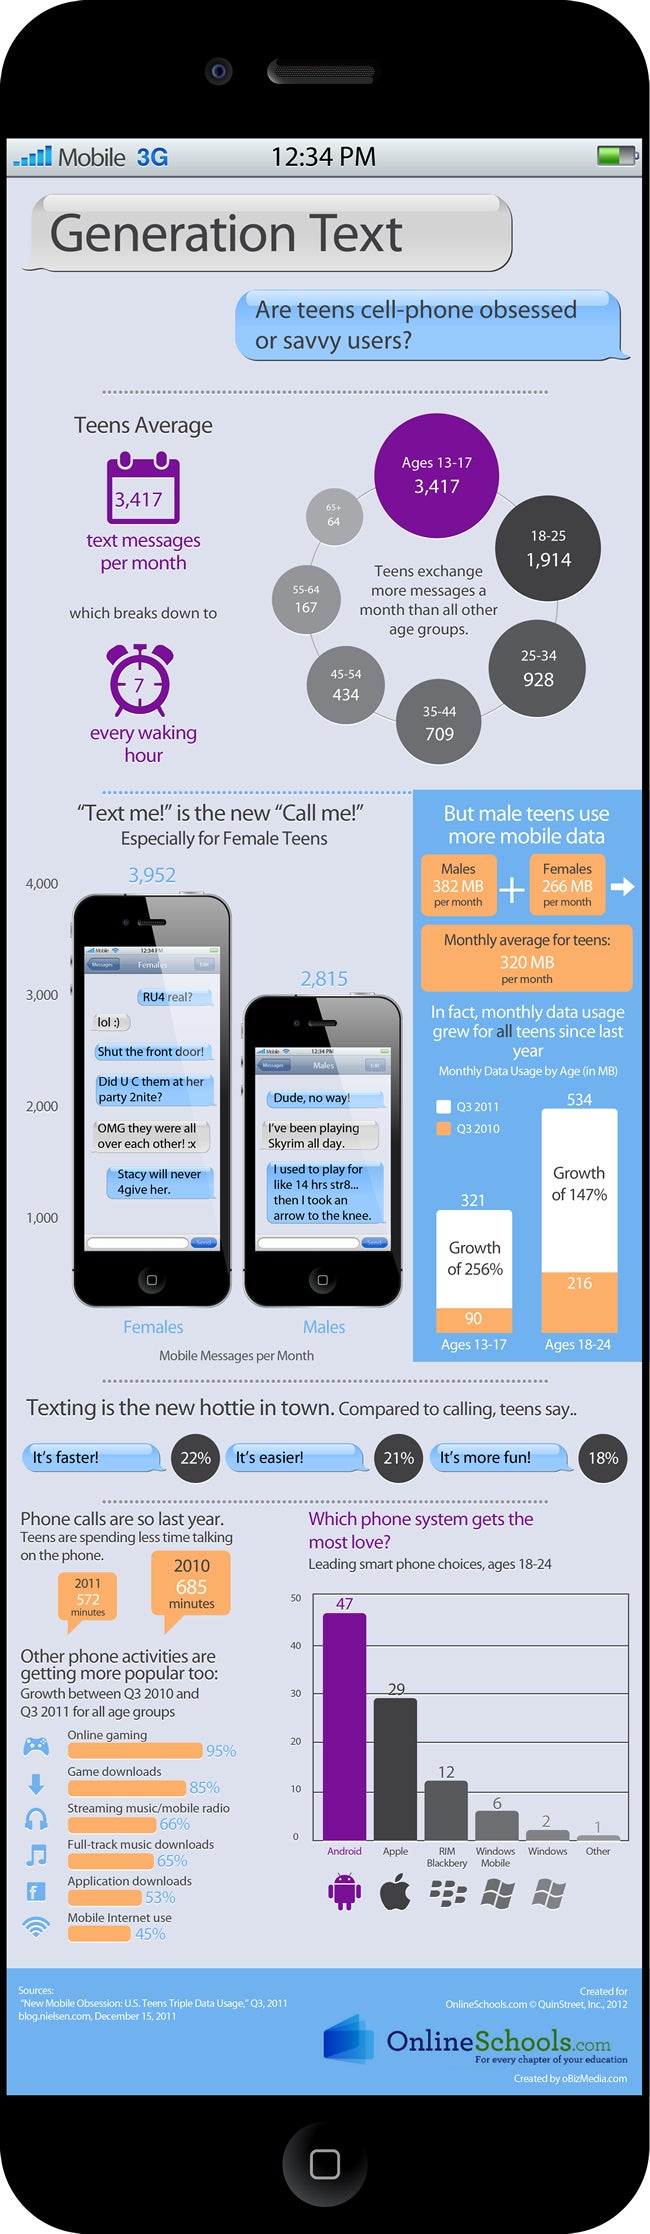 Teen texting hits new heights (infographic)